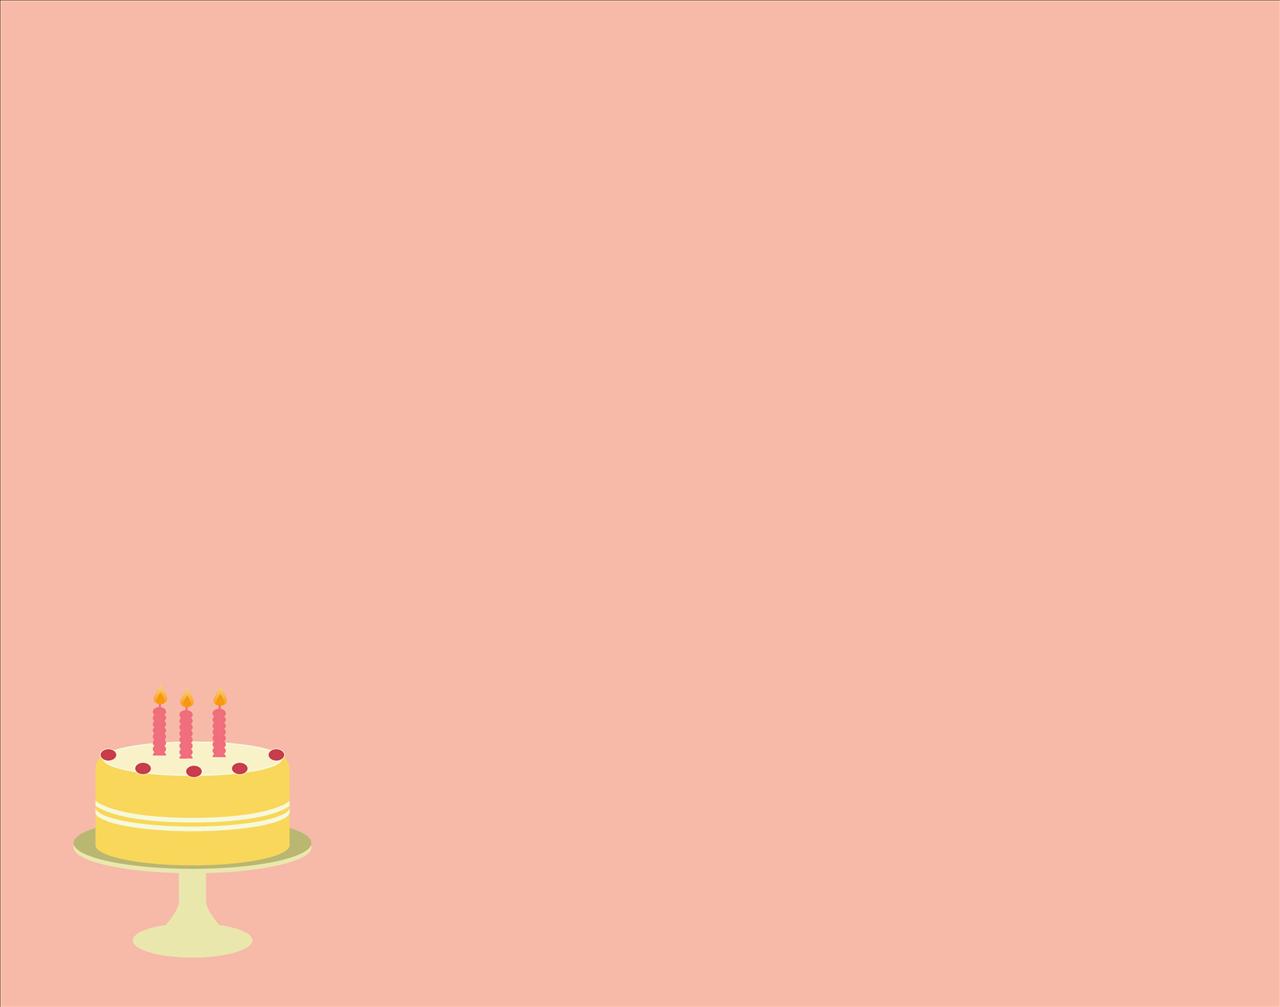   three candles birthday party celebration backgrounds wallpapersjpg